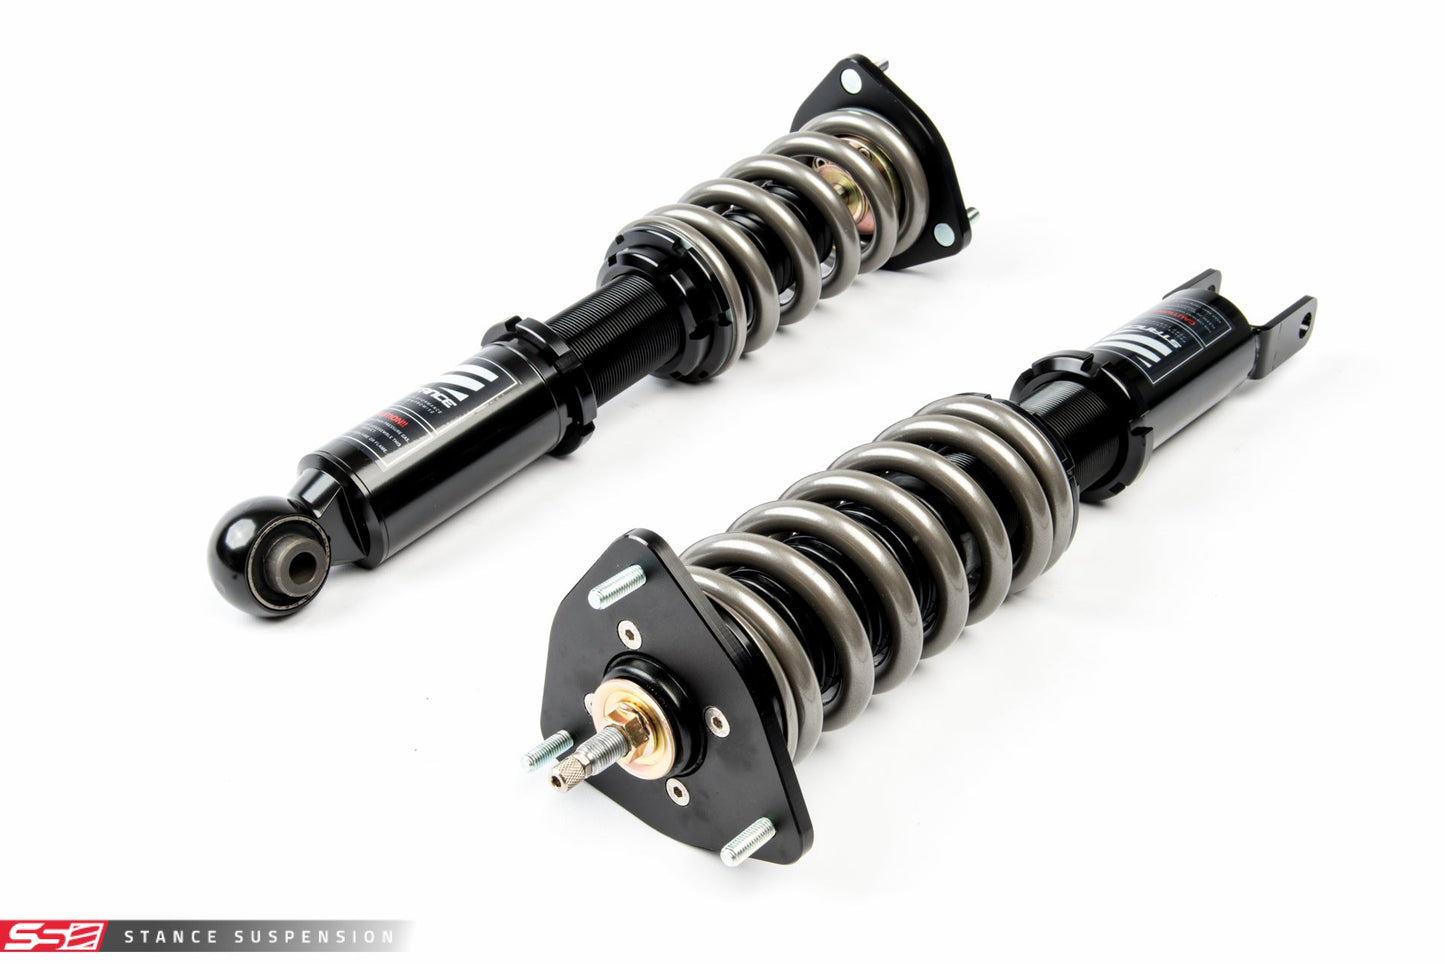 Stance Suspension - XR1 Coilovers for 93-98 Toyota Supra JZA80 (ST-JZA80-XR1)